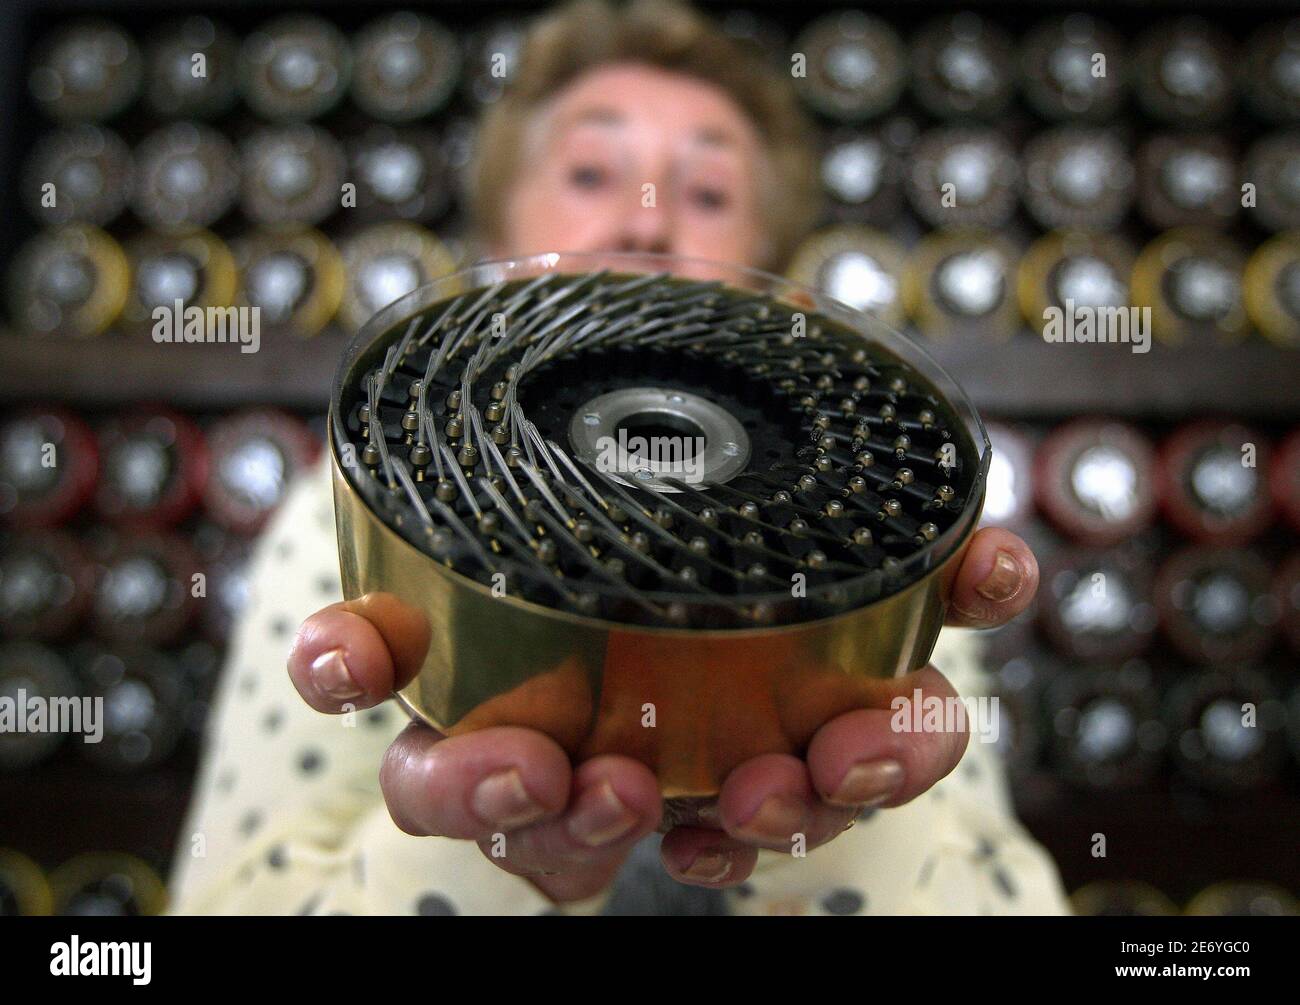 Former Bombe operator Jean Valentine shows a drum of British Turing Bombe machine in Bletchley Park Museum in Bletchley, central England, September 6, 2006. For the first time in sixty years Bletchley Park re-created the way the 'unbreakable' Enigma code was broken using functioning World War Two equipment. The Bombe was the brainchild of mathematical genius' Alan Turing and Gordon Welchman, and enabled Bletchley Park's Cryptographers to decode over 3000 enemy messages a day breaking the codes created by German military Enigma machine during World War Two.   REUTERS/Alessia Pierdomenico (BRITA Stock Photo